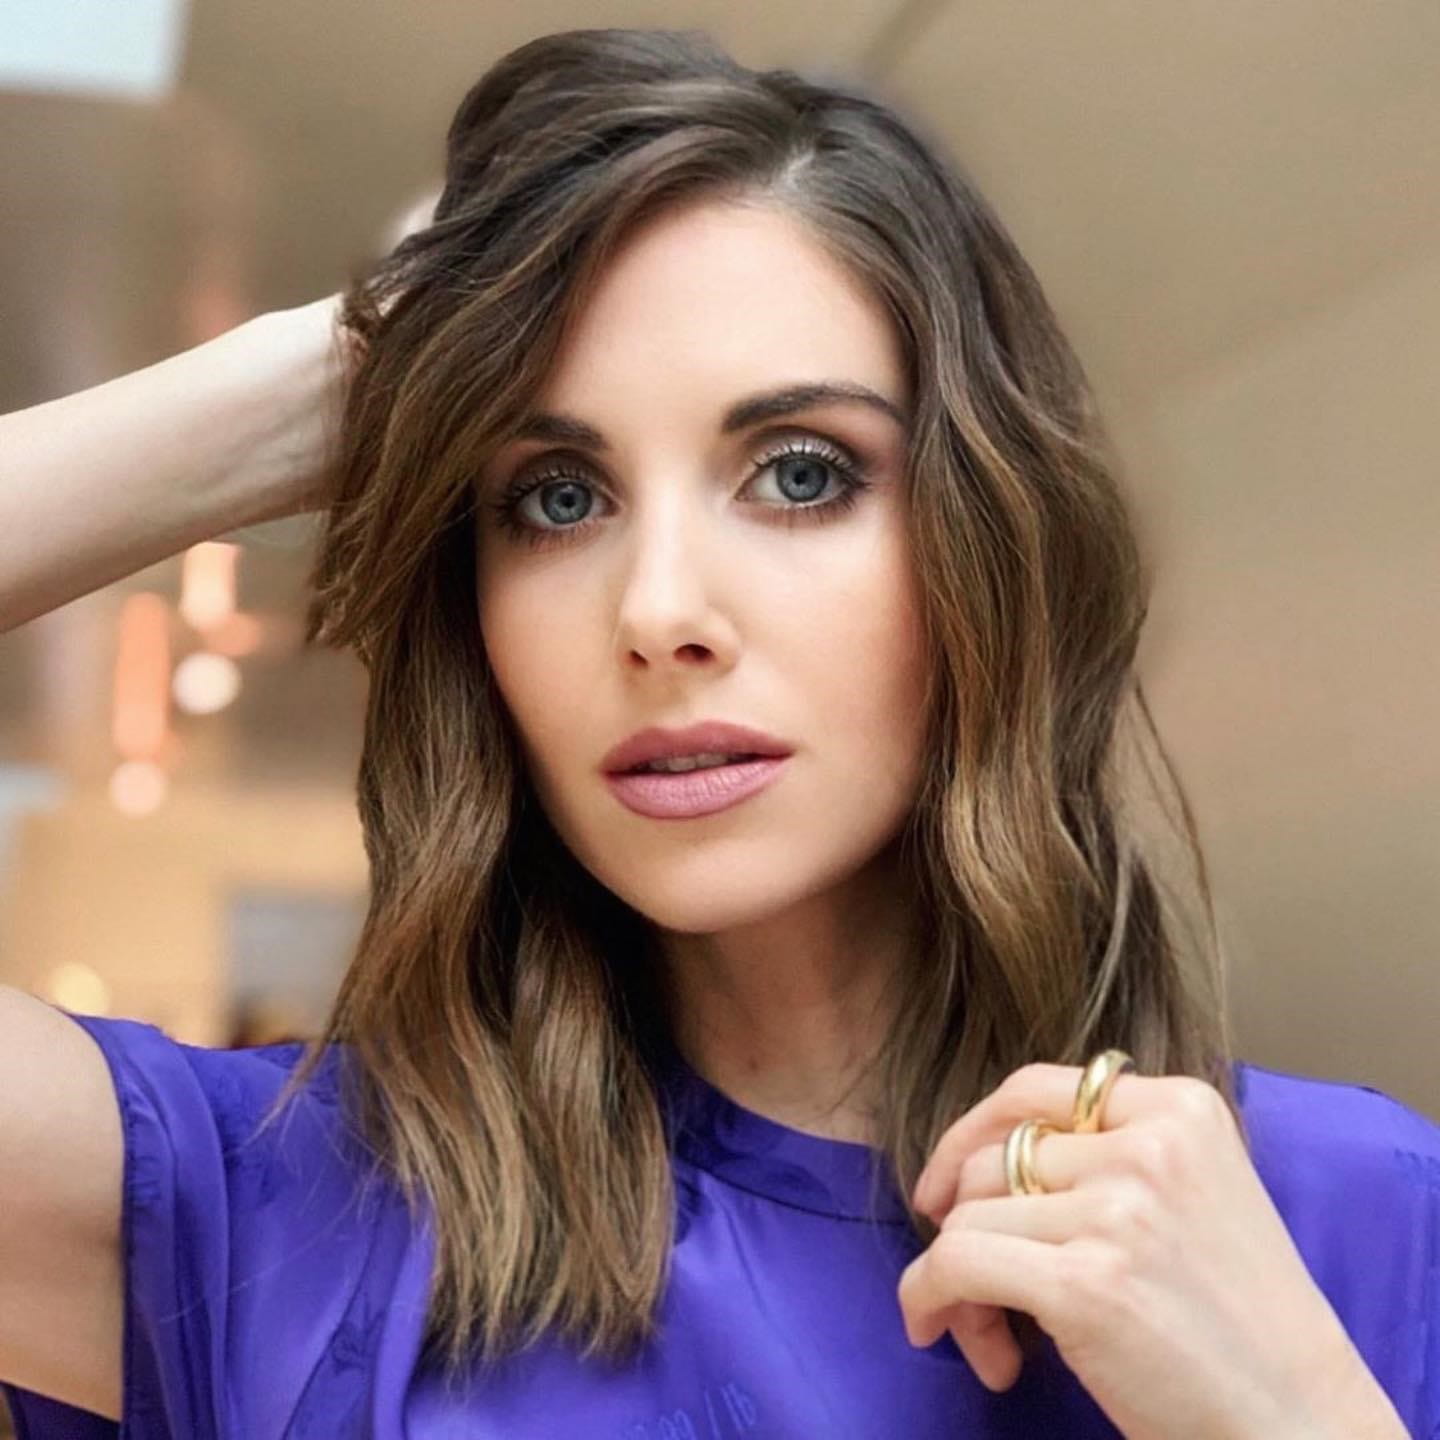 Alison Brie, Alison Brie age, Alison Brie Biography, Alison Brie bra size, Alison Brie breast size, Alison Brie Carrier, Alison Brie children, Alison Brie cup size, Alison Brie dress size, Alison Brie Early life, Alison Brie eyes color, Alison Brie feet size, Alison Brie full-body measurements, Alison Brie hair, Alison Brie height, Alison Brie hobbies, Alison Brie hot, Alison Brie hot images, Alison Brie husband, Alison Brie Instagram, Alison Brie measurements, Alison Brie movies list, Alison Brie net worth, Alison Brie personal info, Alison Brie shoe size, Alison Brie social media, Alison Brie Twitter, Alison Brie upcoming movies, Alison Brie wallpaper, Alison Brie weight, Alison Brie Young, American celebrities, Hollywood actress, How old is Alison Brie, Model Alison Brie, Most popular actress in America, top hollywood actress